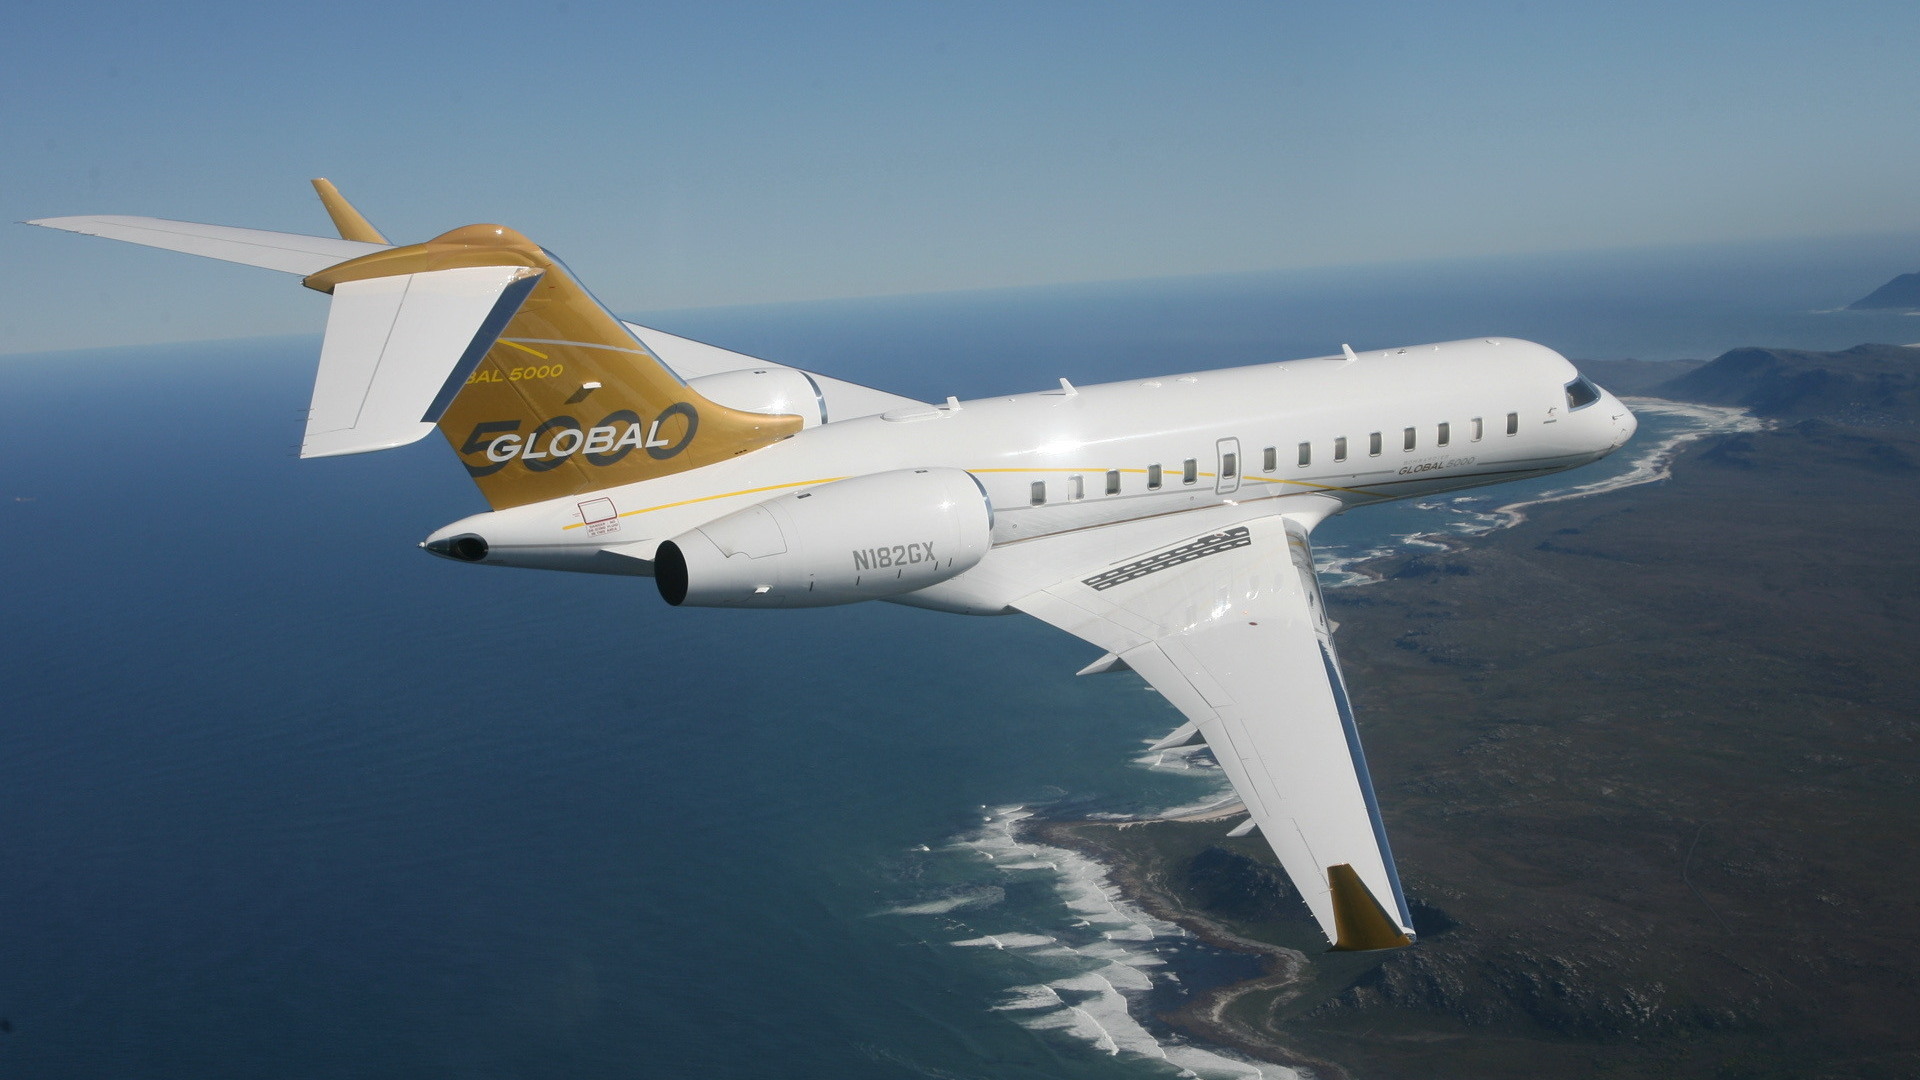 Bombardier Global Express XRS